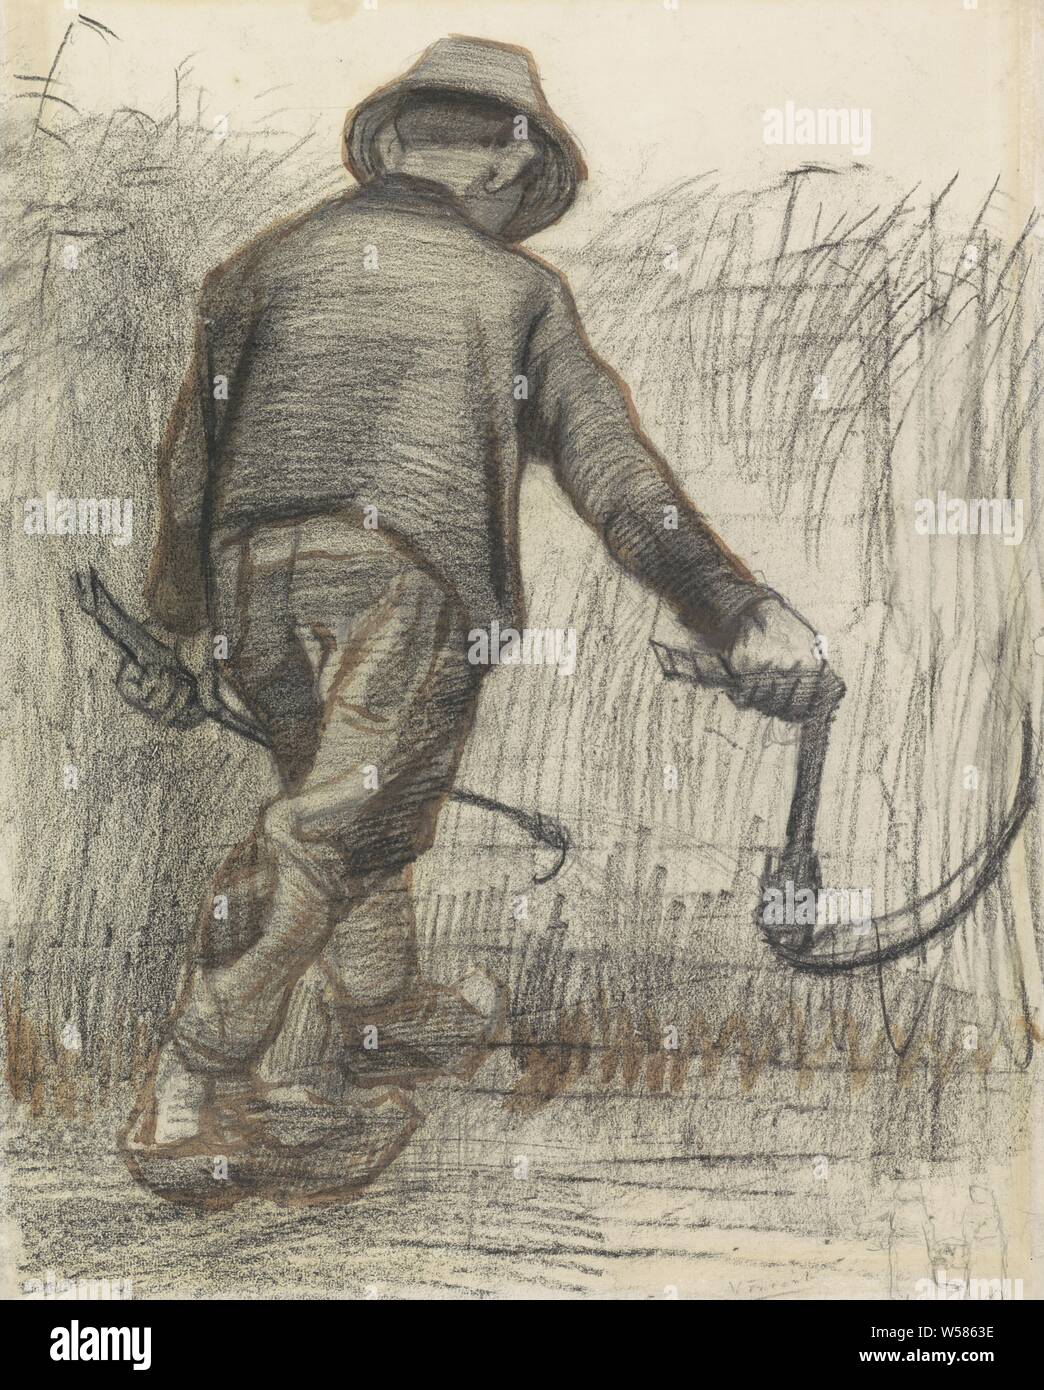 Corn cutter with hat, seen from behind, reaping, picking, mowing, harvest, agricultural implements: sickle, Vincent van Gogh (signed by artist), 1863 - 1890, paper, chalk, pencil, brush, h 483 mm × w 362 mm Stock Photo